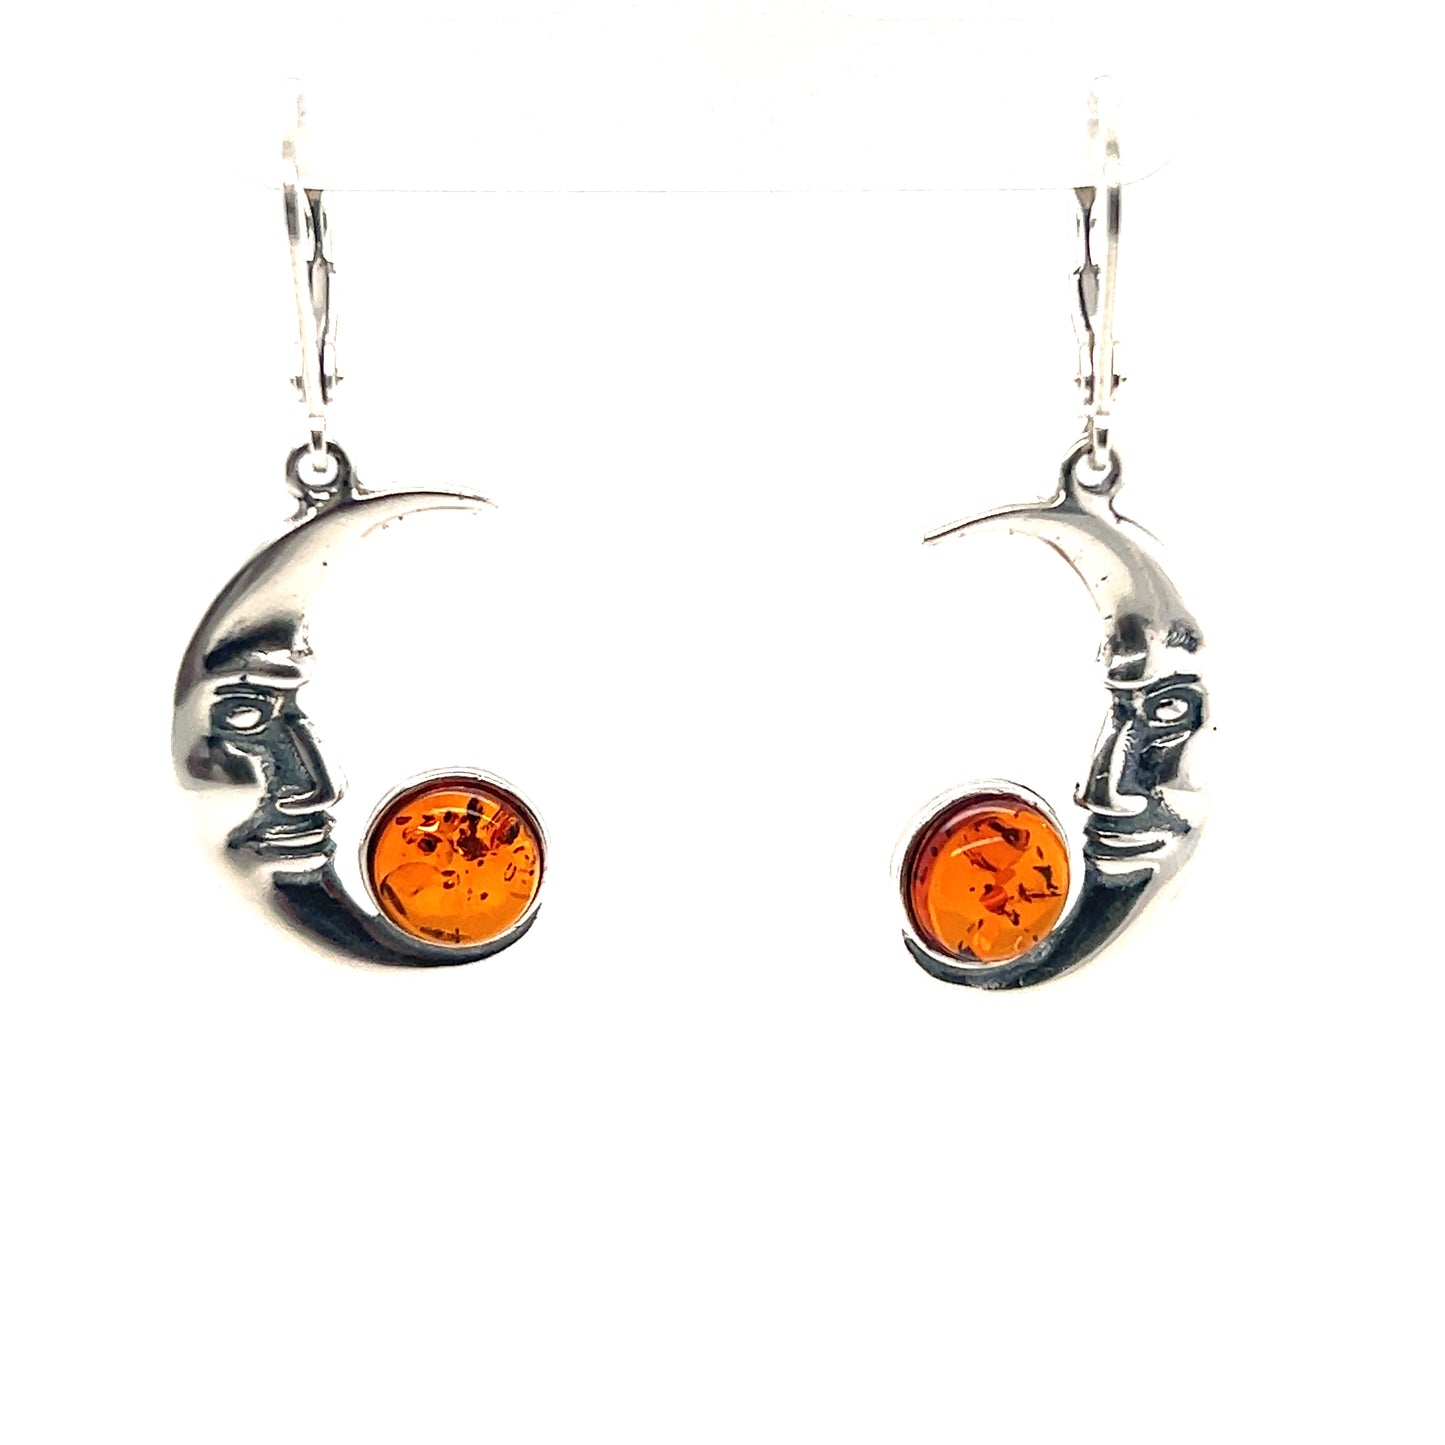 Beautiful Amber Man-in-the-Moon Earrings with a charming crescent moon design by Super Silver.